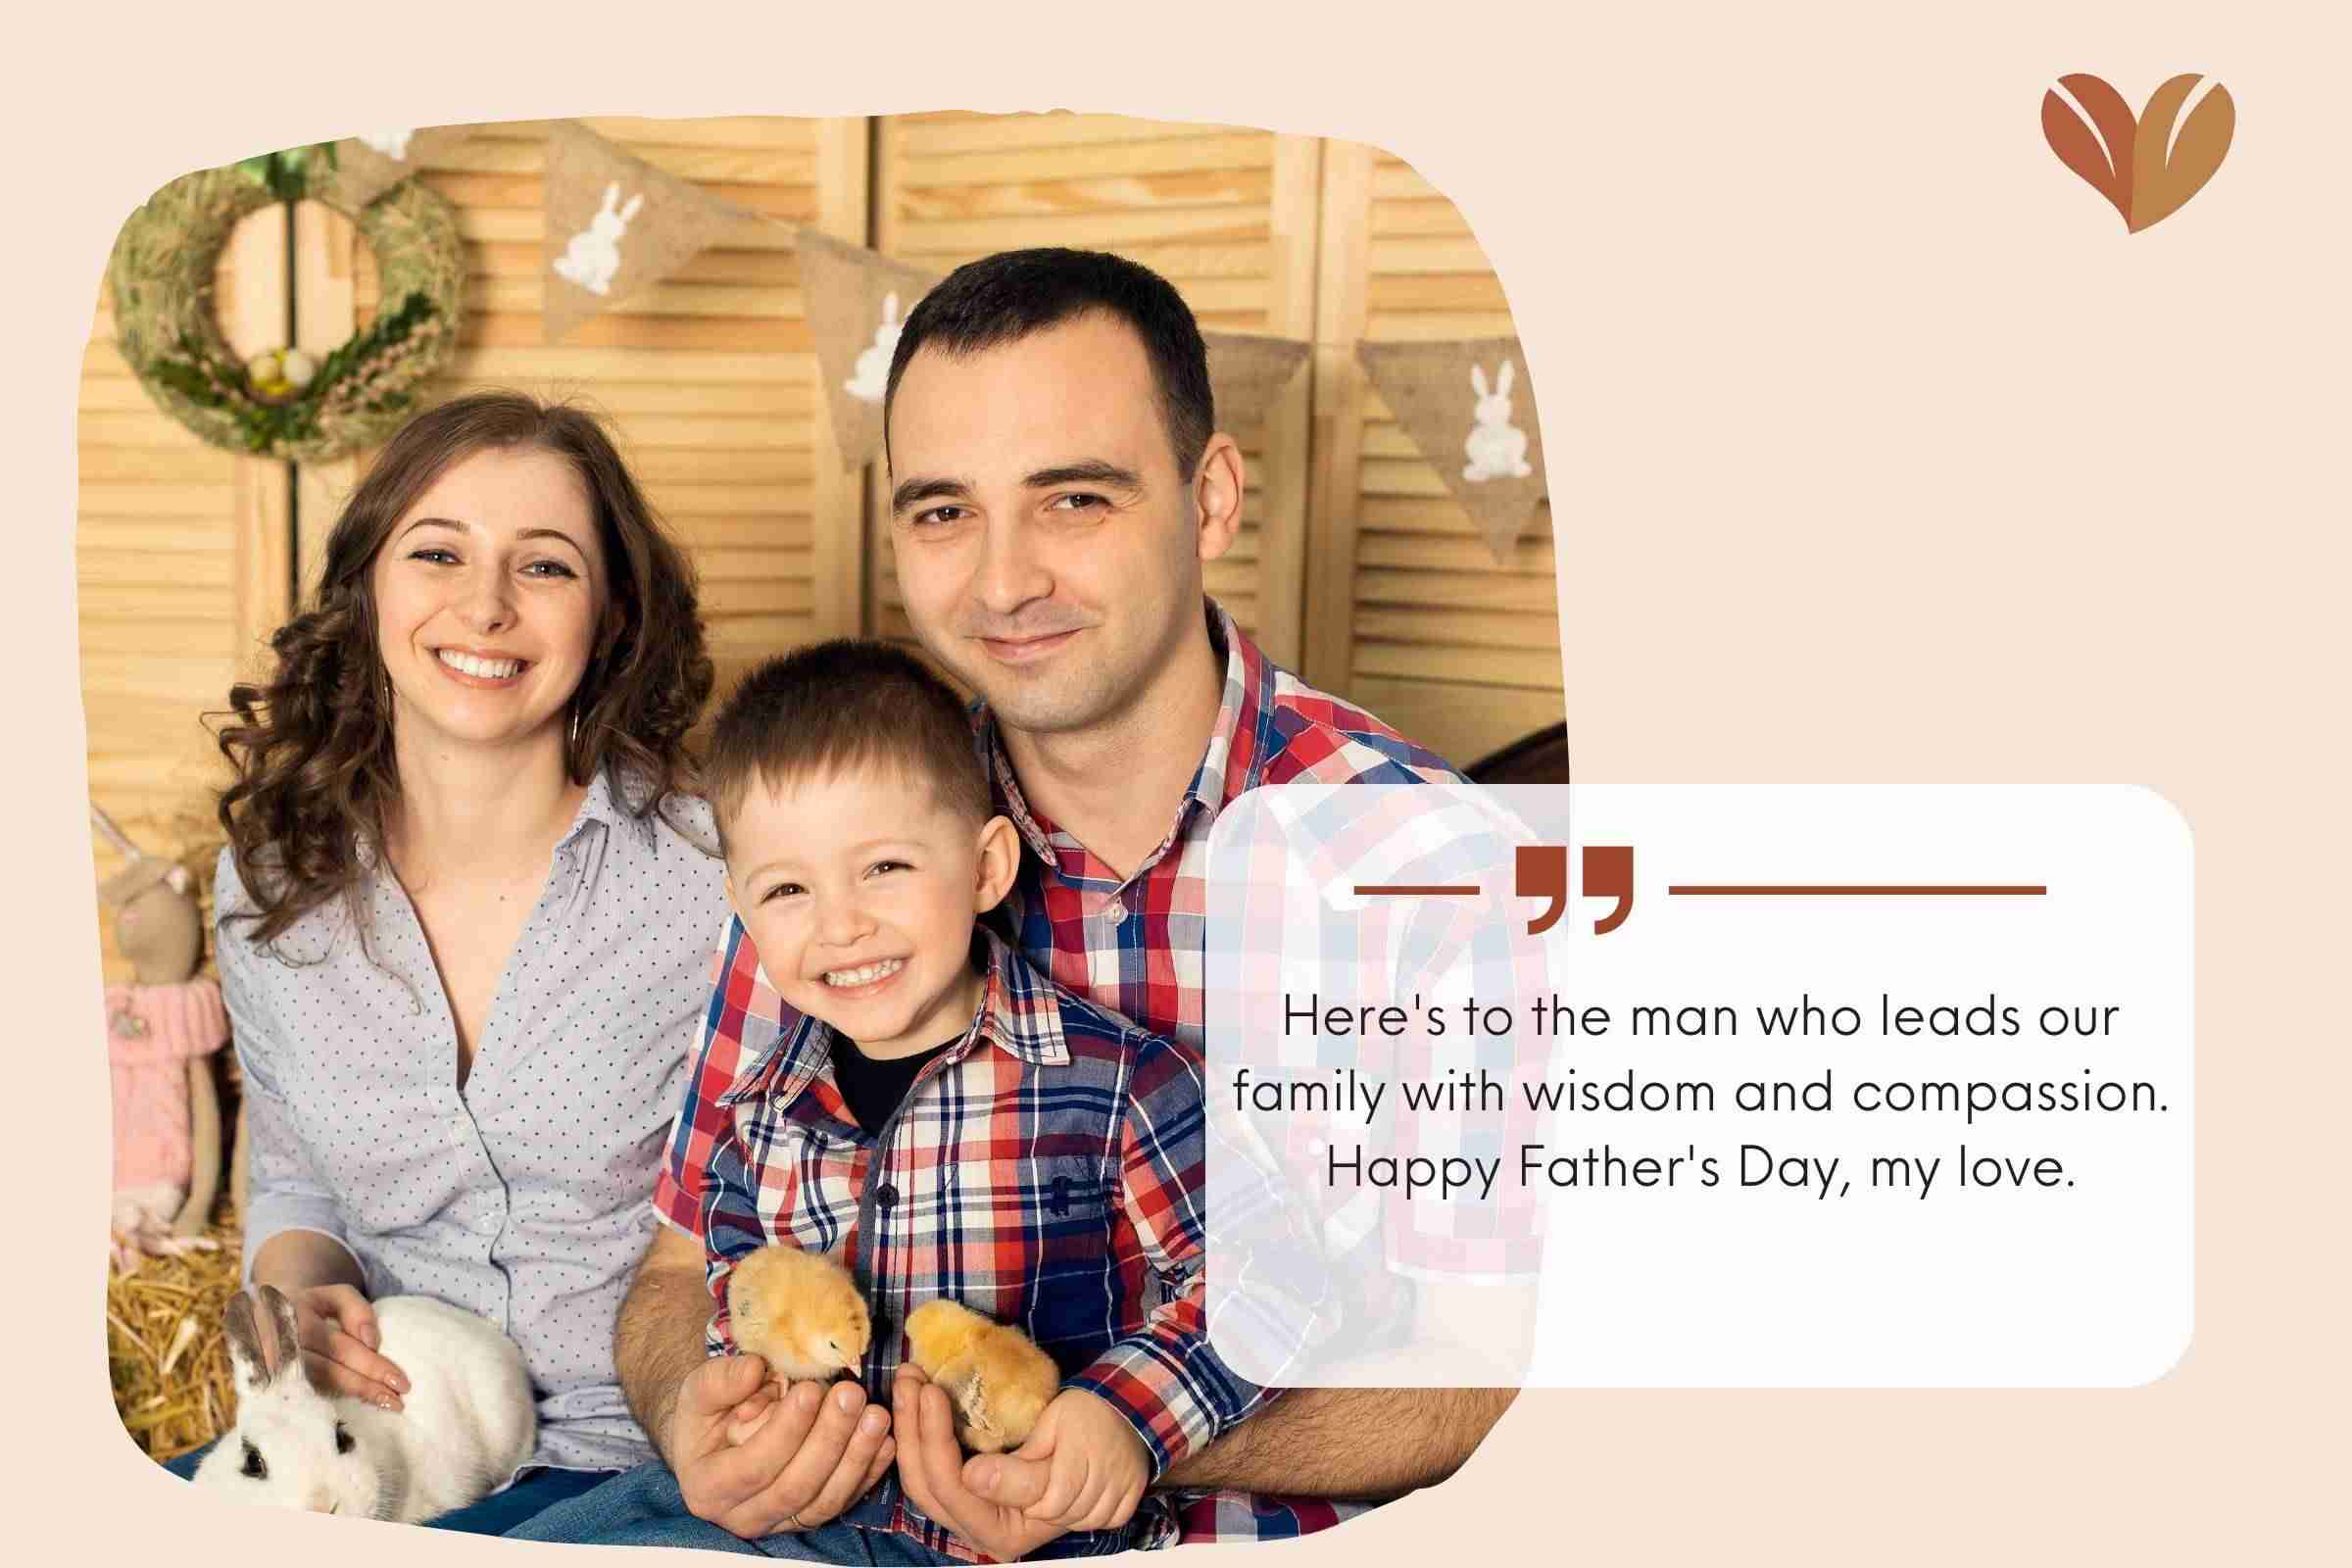 Happy Father's Day Quotes for Husband: Honoring Your Husband